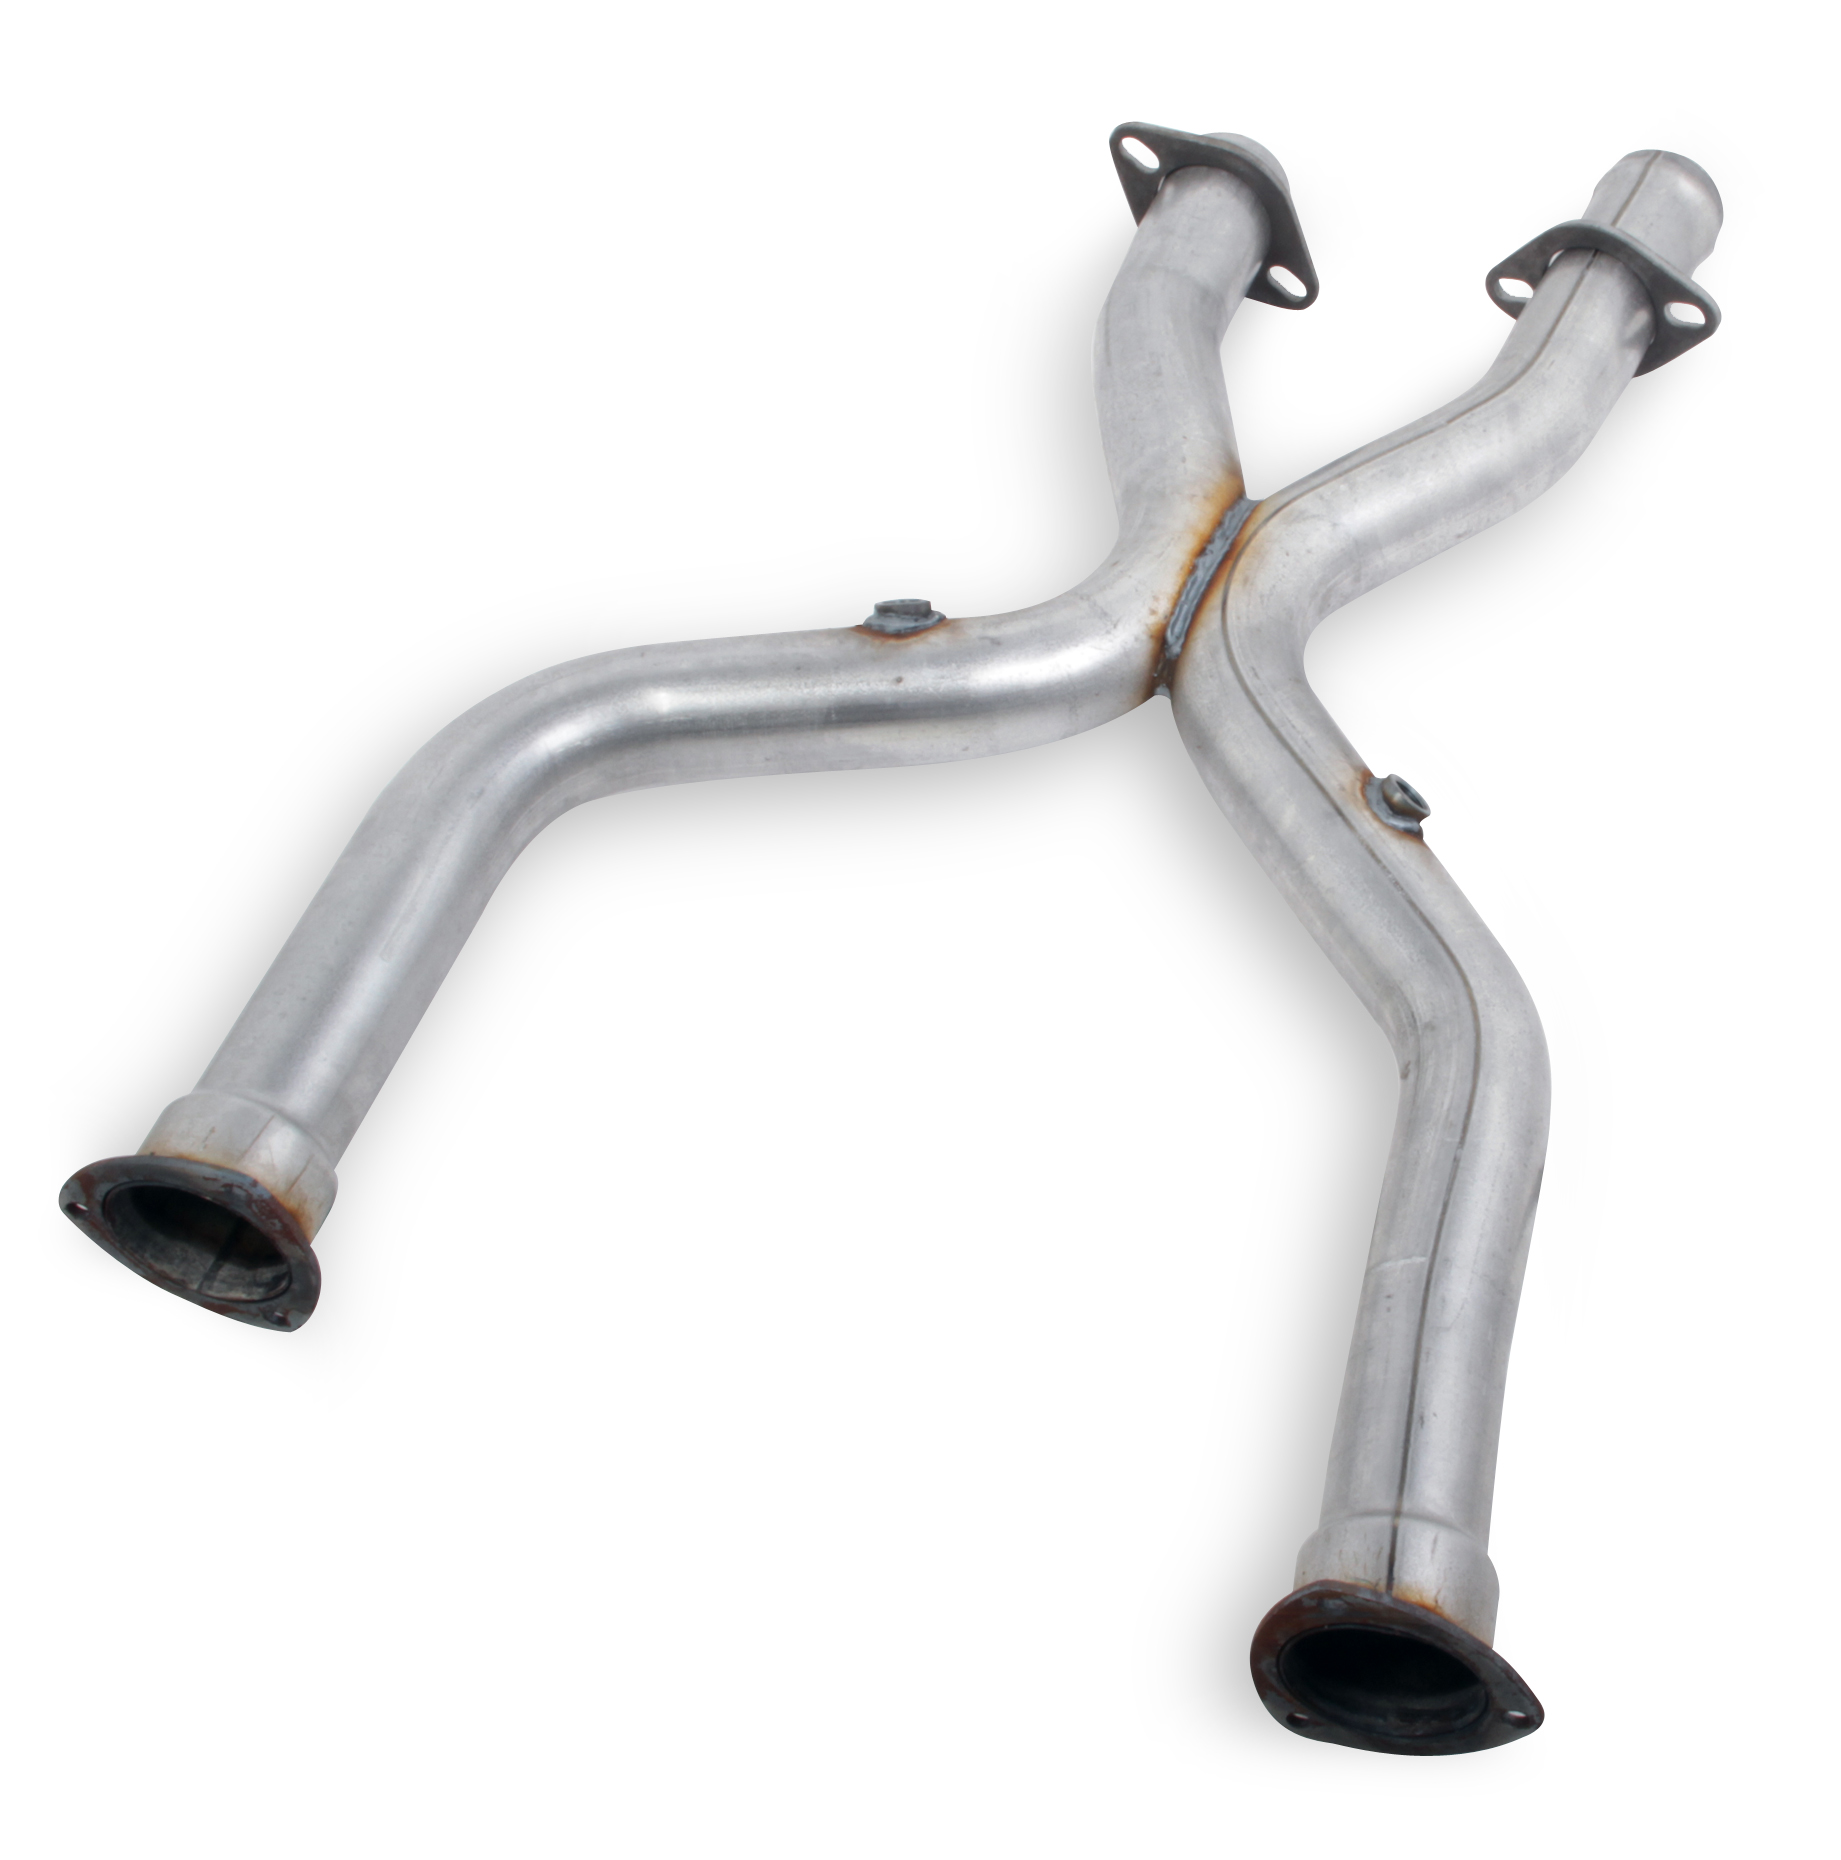 1996-2003 Ford Mustang 4.6L 2V V8 Flowtech 2.5" to 3"  Aluminized X-Pipe